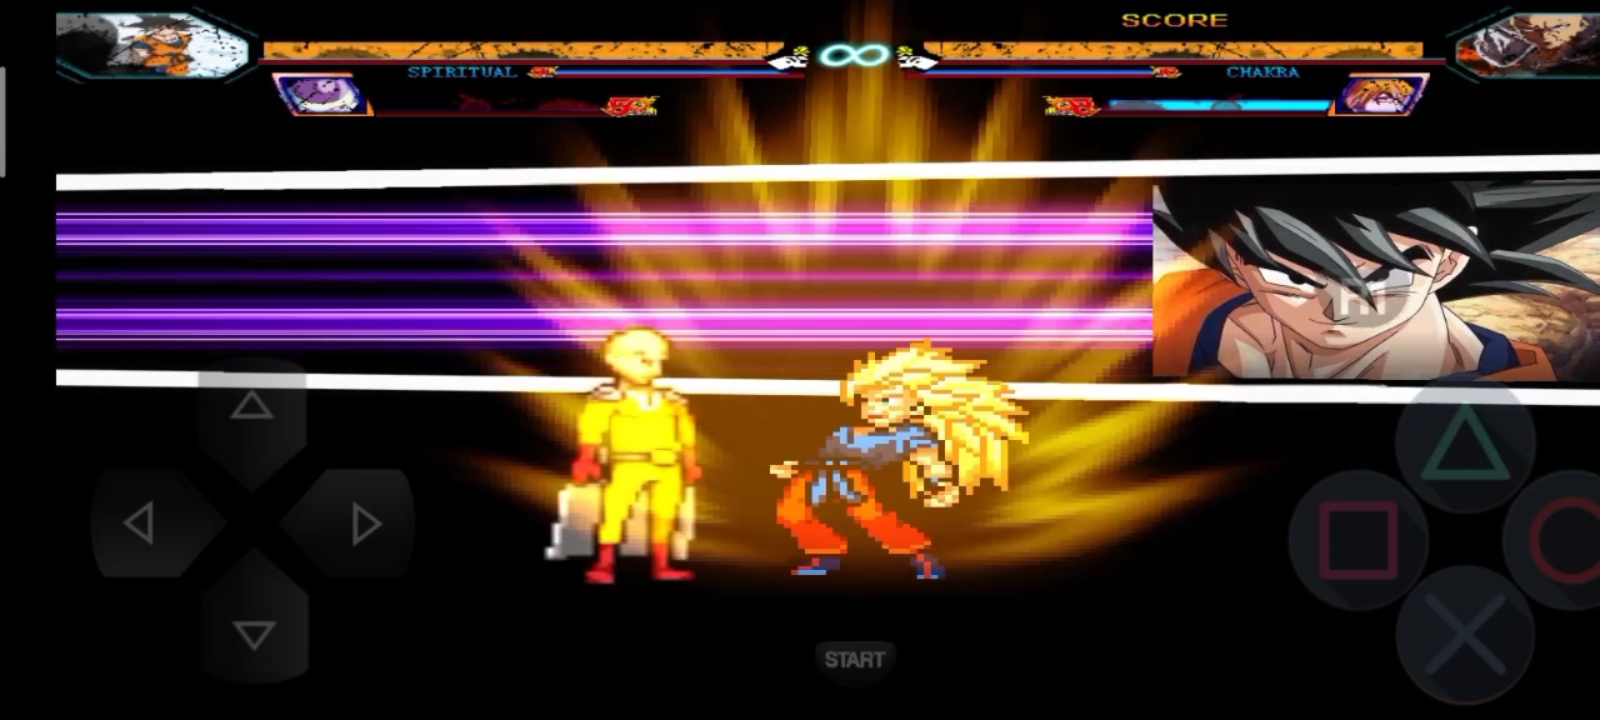 Jump Ultimate Stars Anime Mugen apk For Android 150+ Characters Download